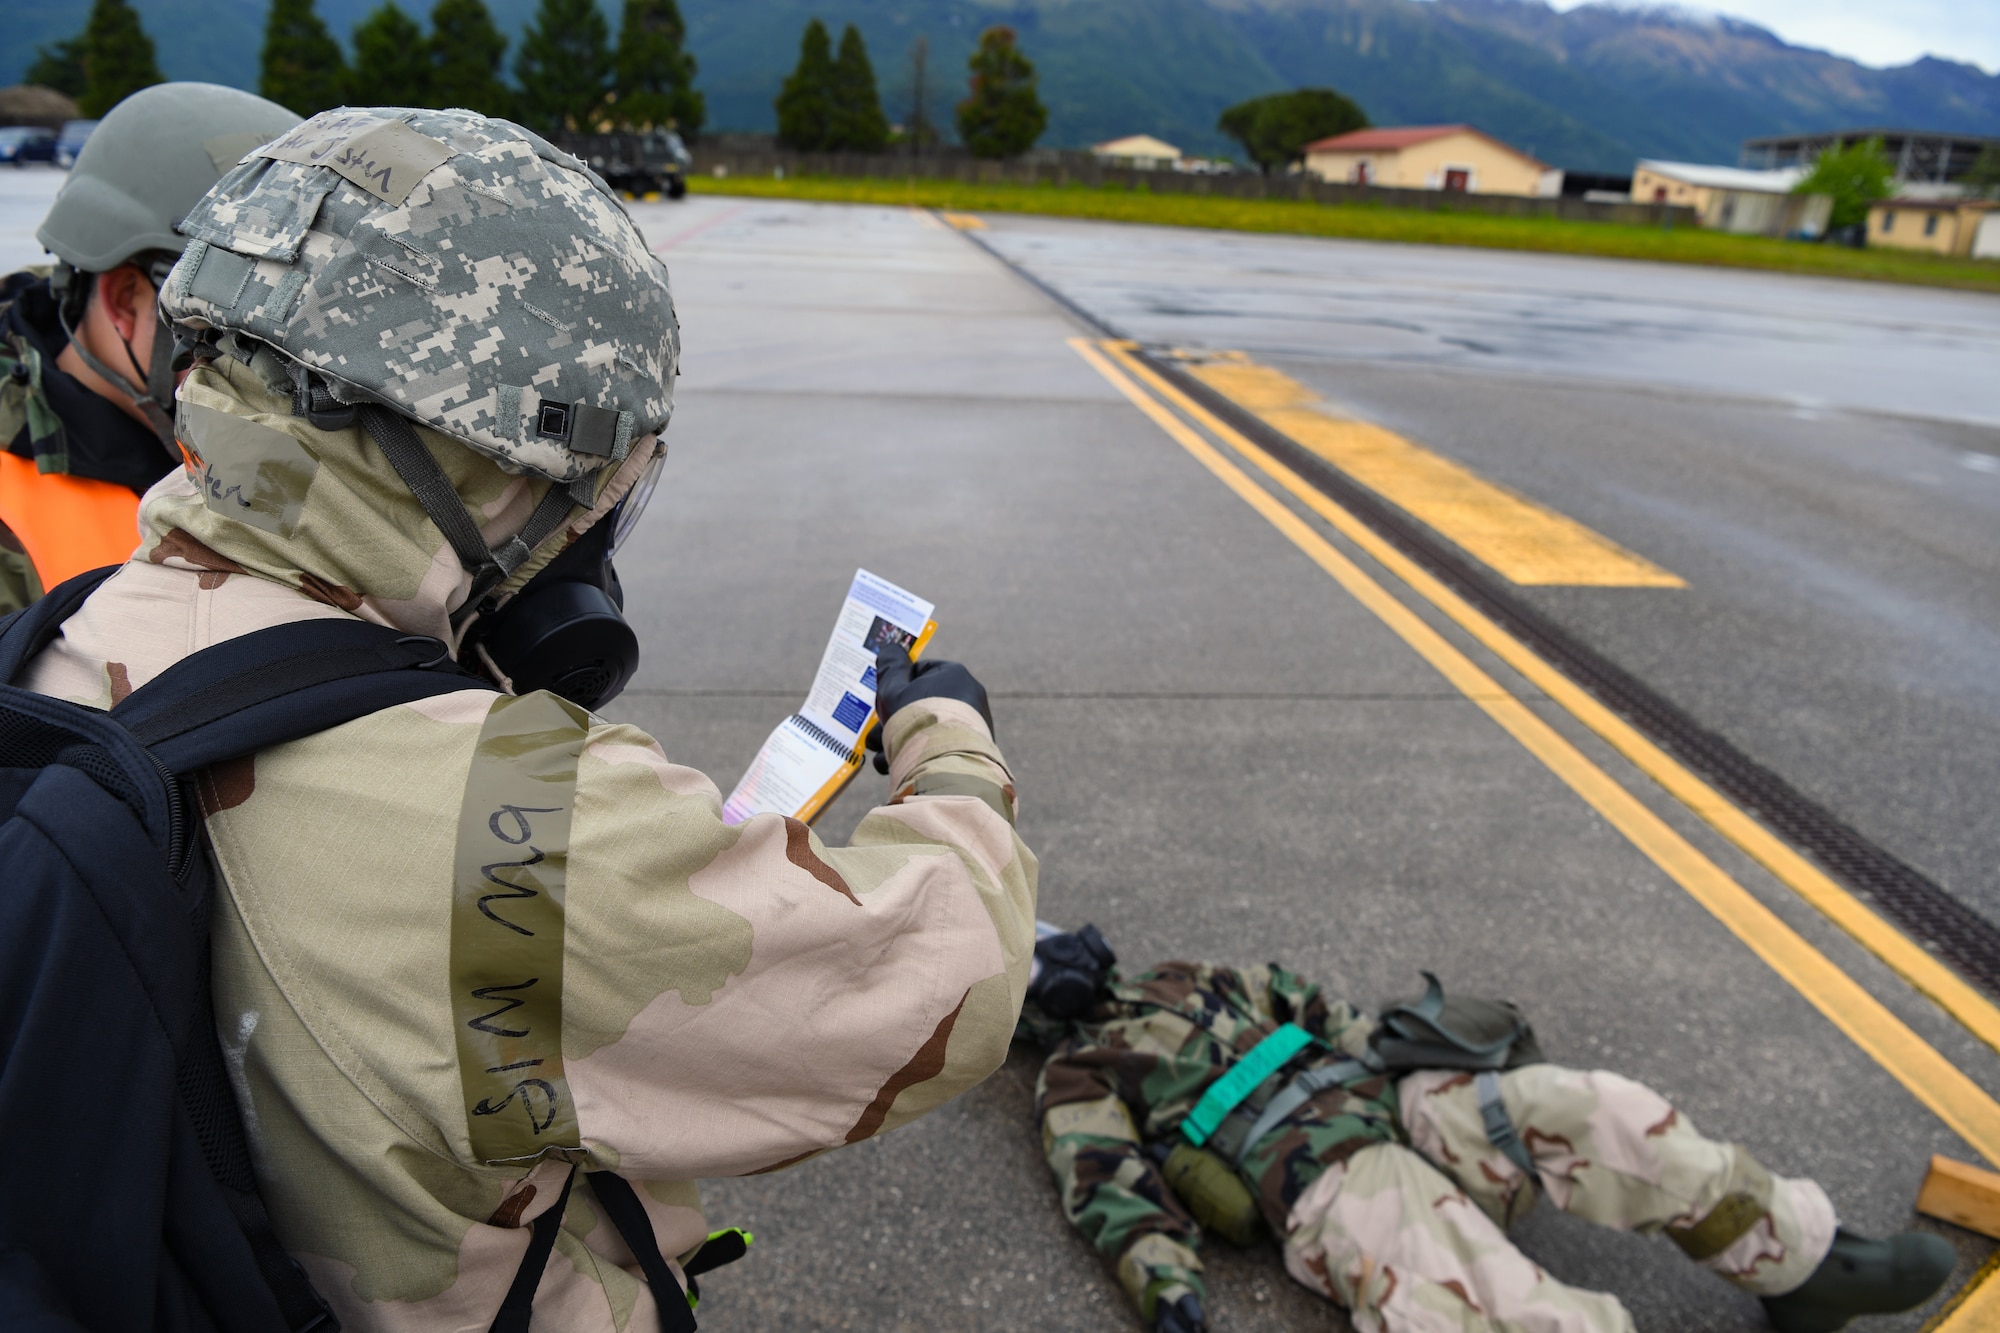 U.S. Airmen with the 724th Air Mobility Squadron participate in a Nodal Lightning exercise at Aviano Air Base, Italy, May 19, 2021. Nodal Lightning is a simulated air and chemical attack followed by other scenarios that test the teams Chemical, Biological, Radiological and Nuclear response. (U.S. Air Force photo by Airman 1st Class Thomas S. Keisler IV)